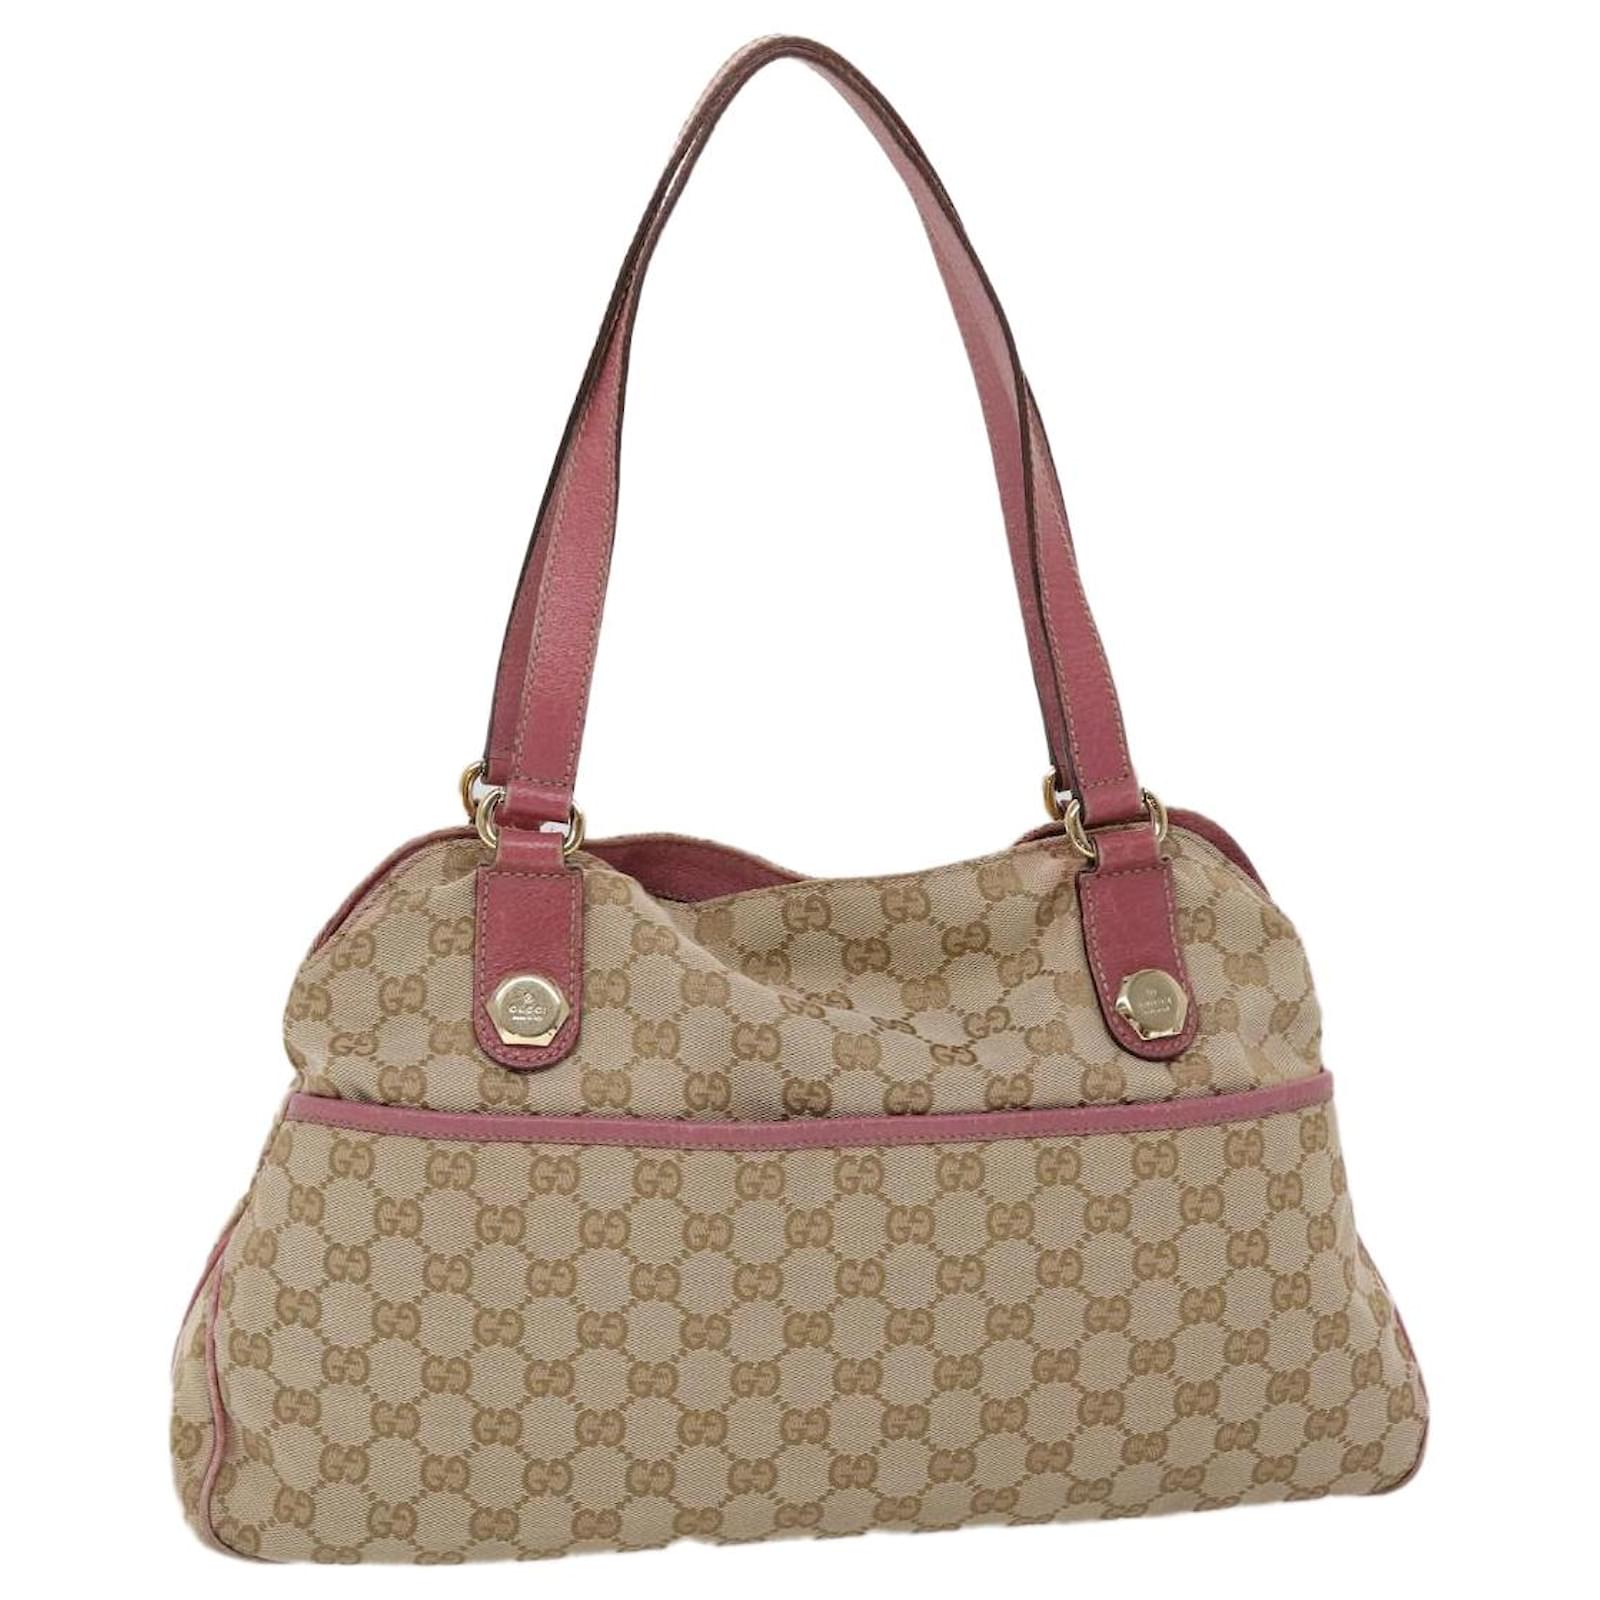 GUCCI GG Canvas Tote Bag Leather Beige Pink 163288 Auth tb708 ref